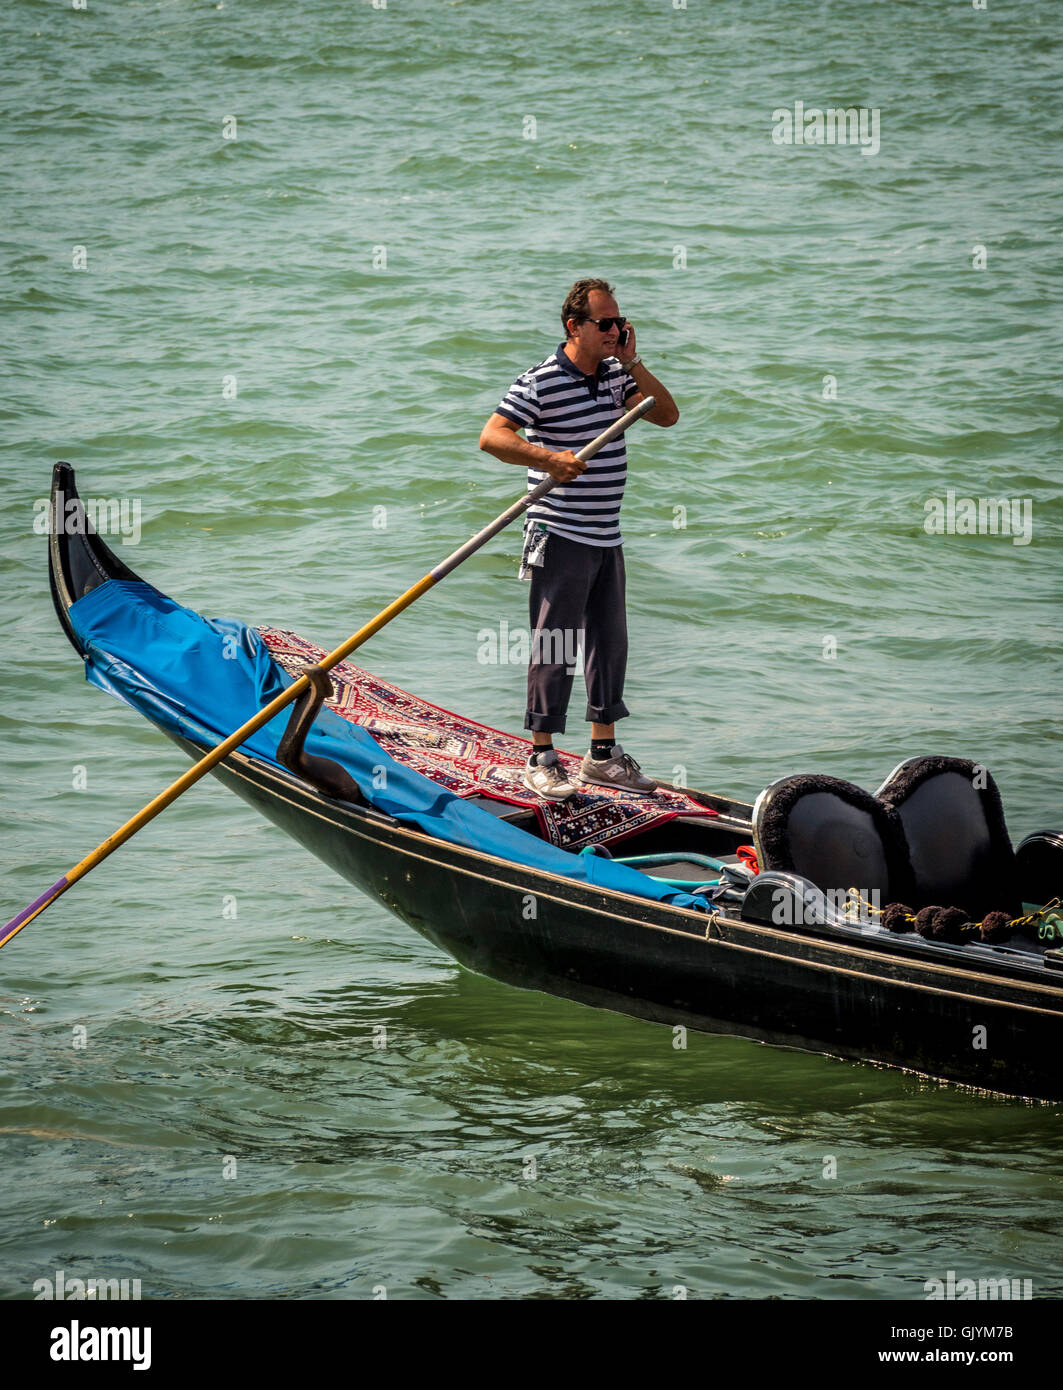 Gondolier wearing traditional striped top steering his gondola whilst talking on his mobile phone. Venice, Italy. Stock Photo